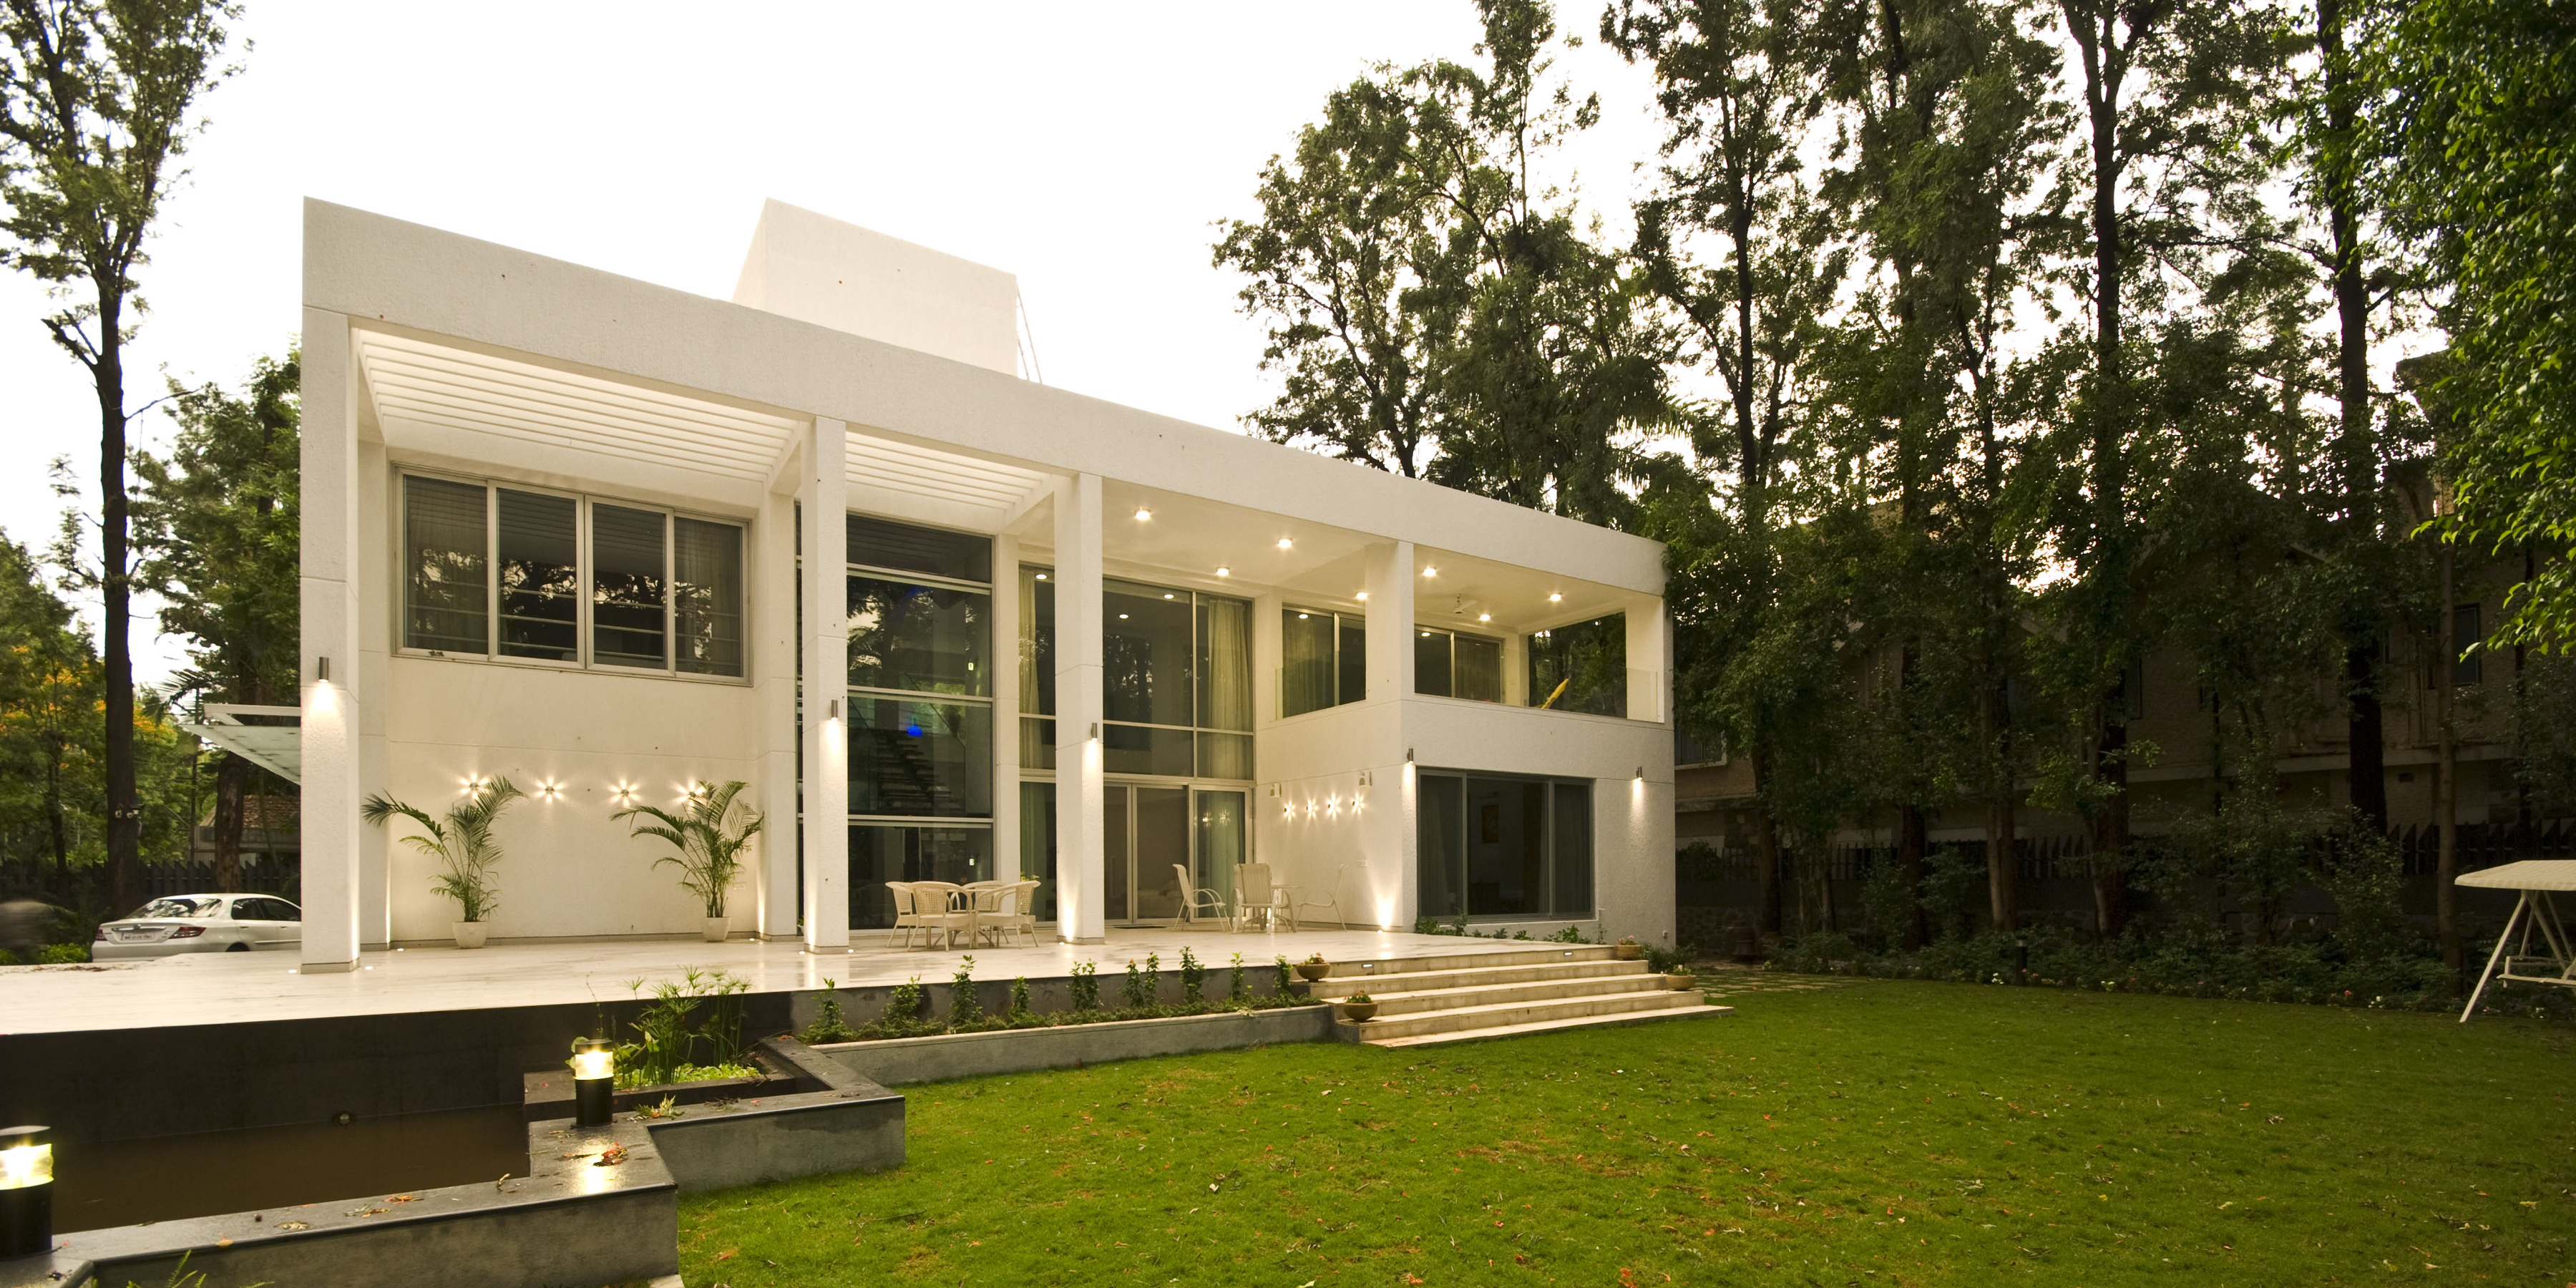 Villa Blanca published in “50 Beautiful Houses in India” | Chaney